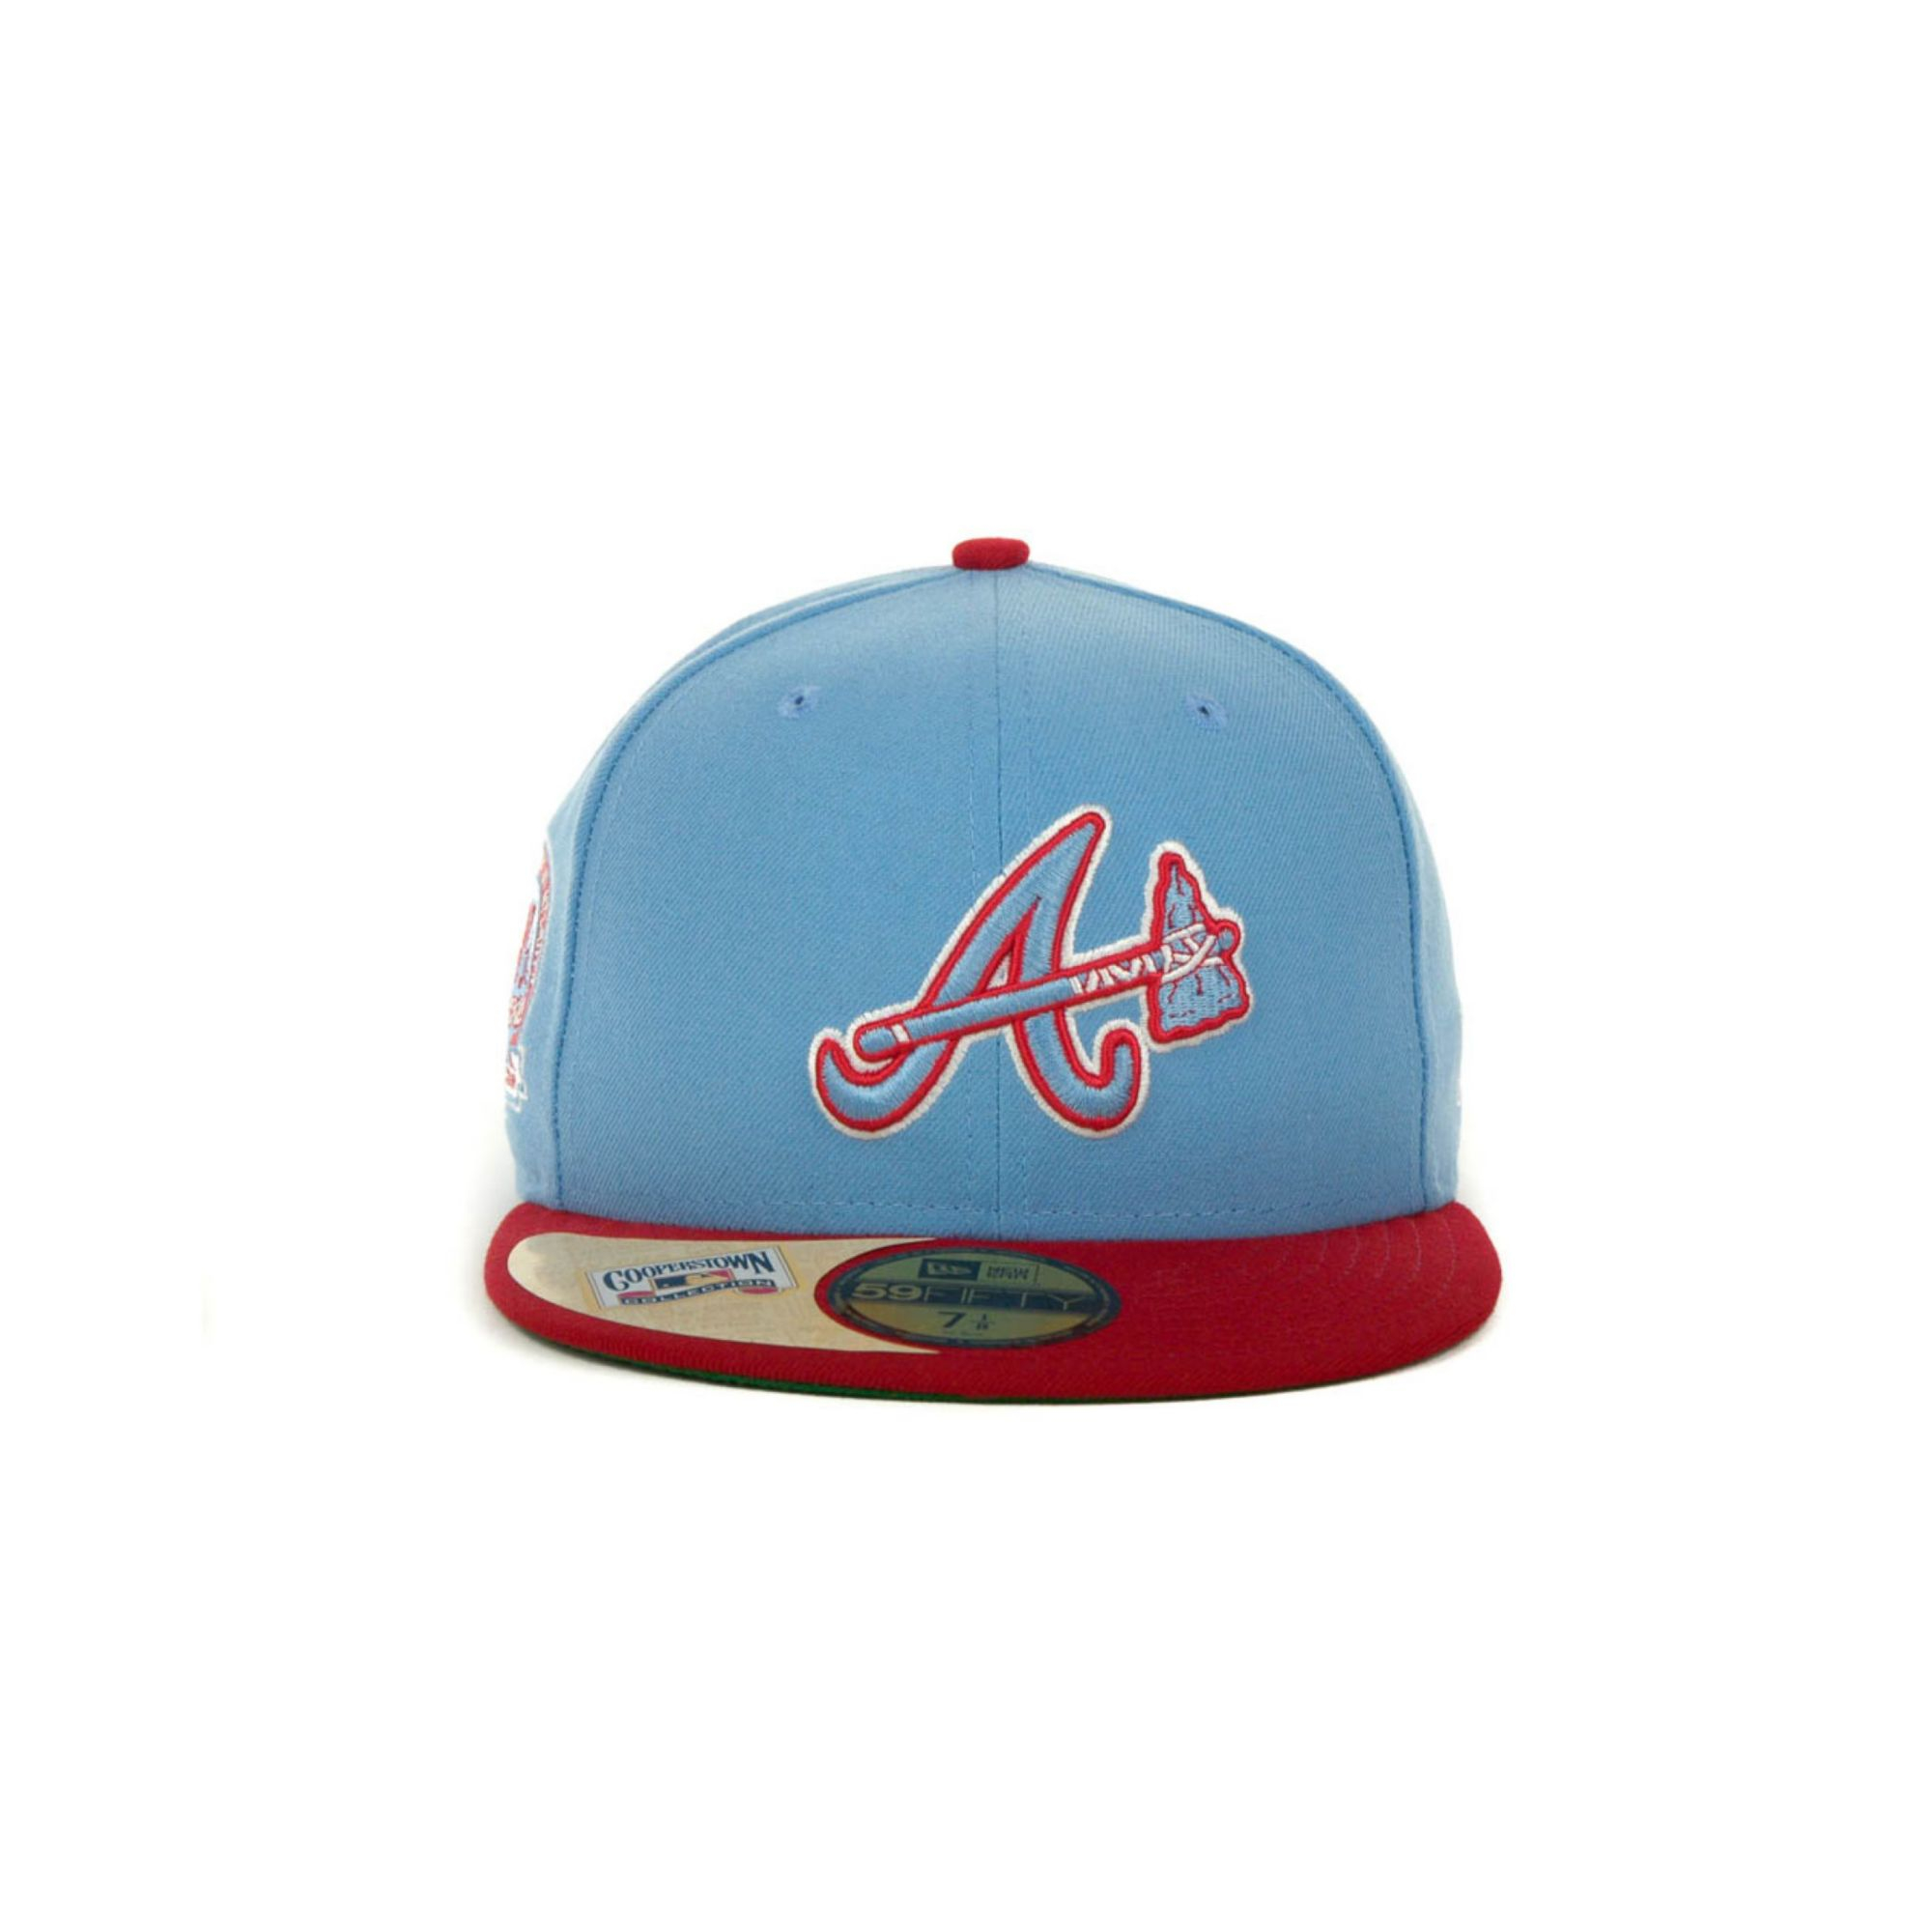 Men's Fanatics Branded Navy/Red Atlanta Braves Cooperstown Collection Two-Tone Fitted Hat